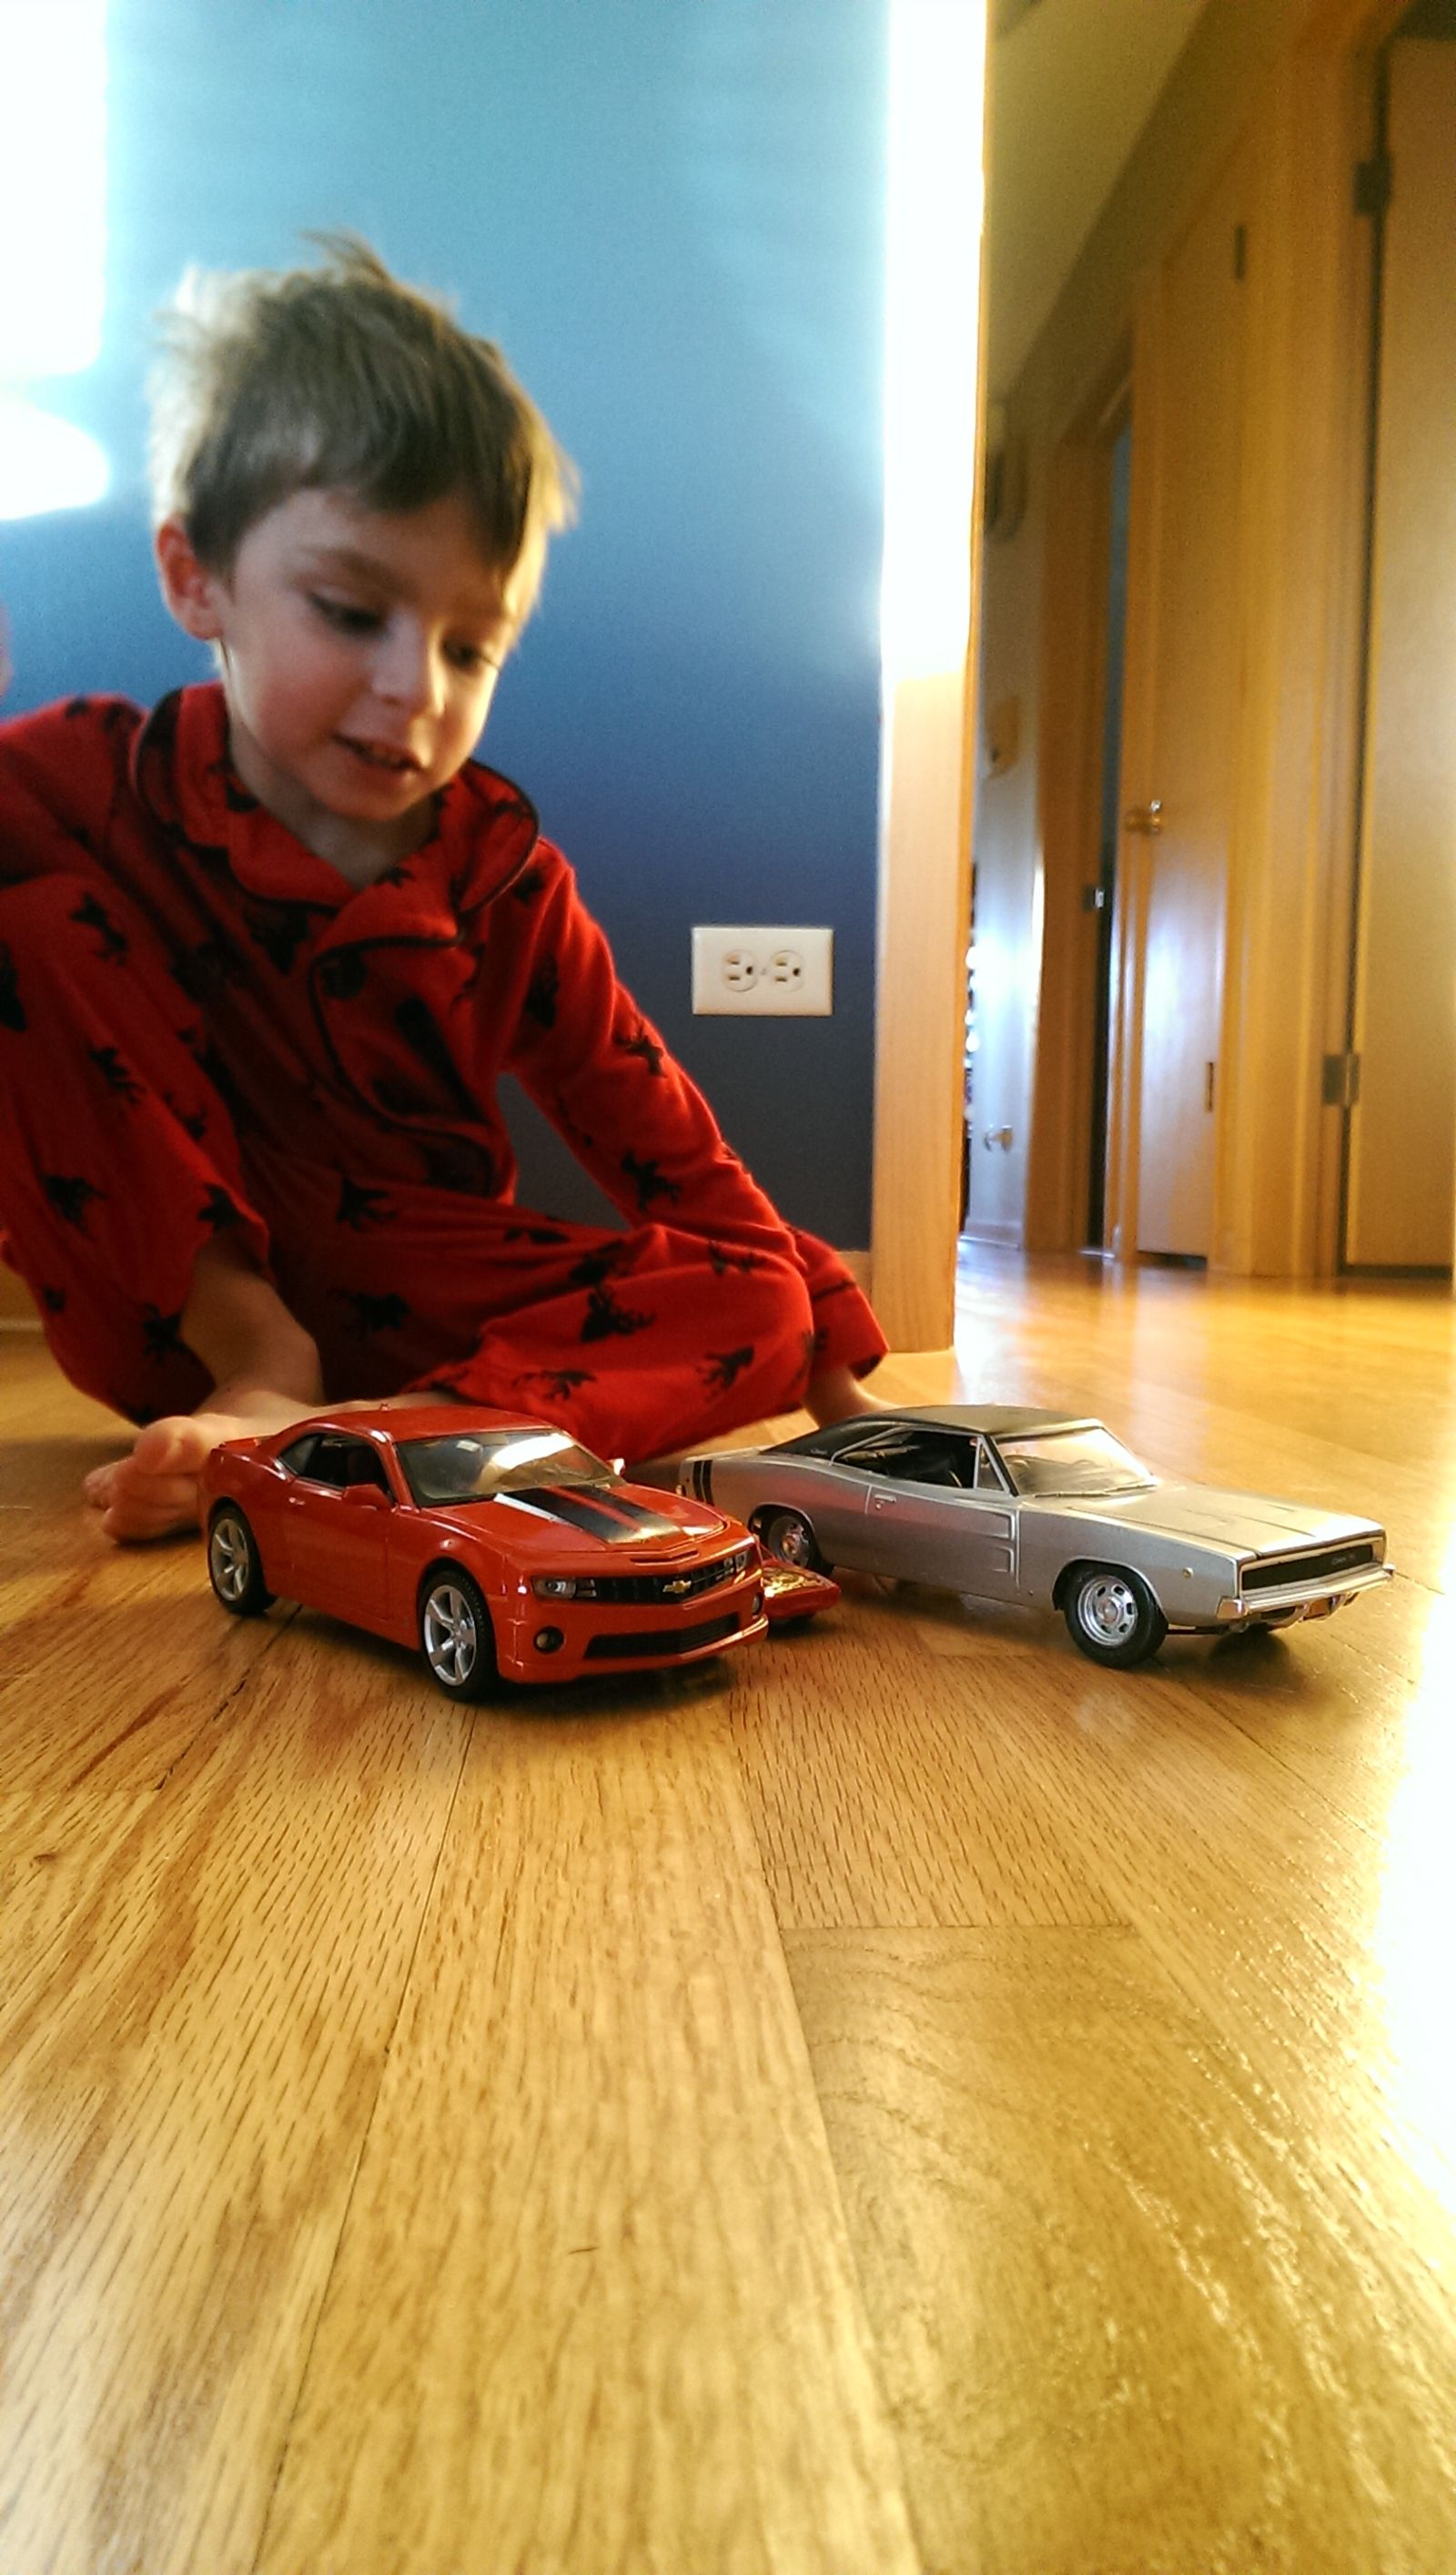 Illustration for article titled I told my nephew I could make the cars bigger